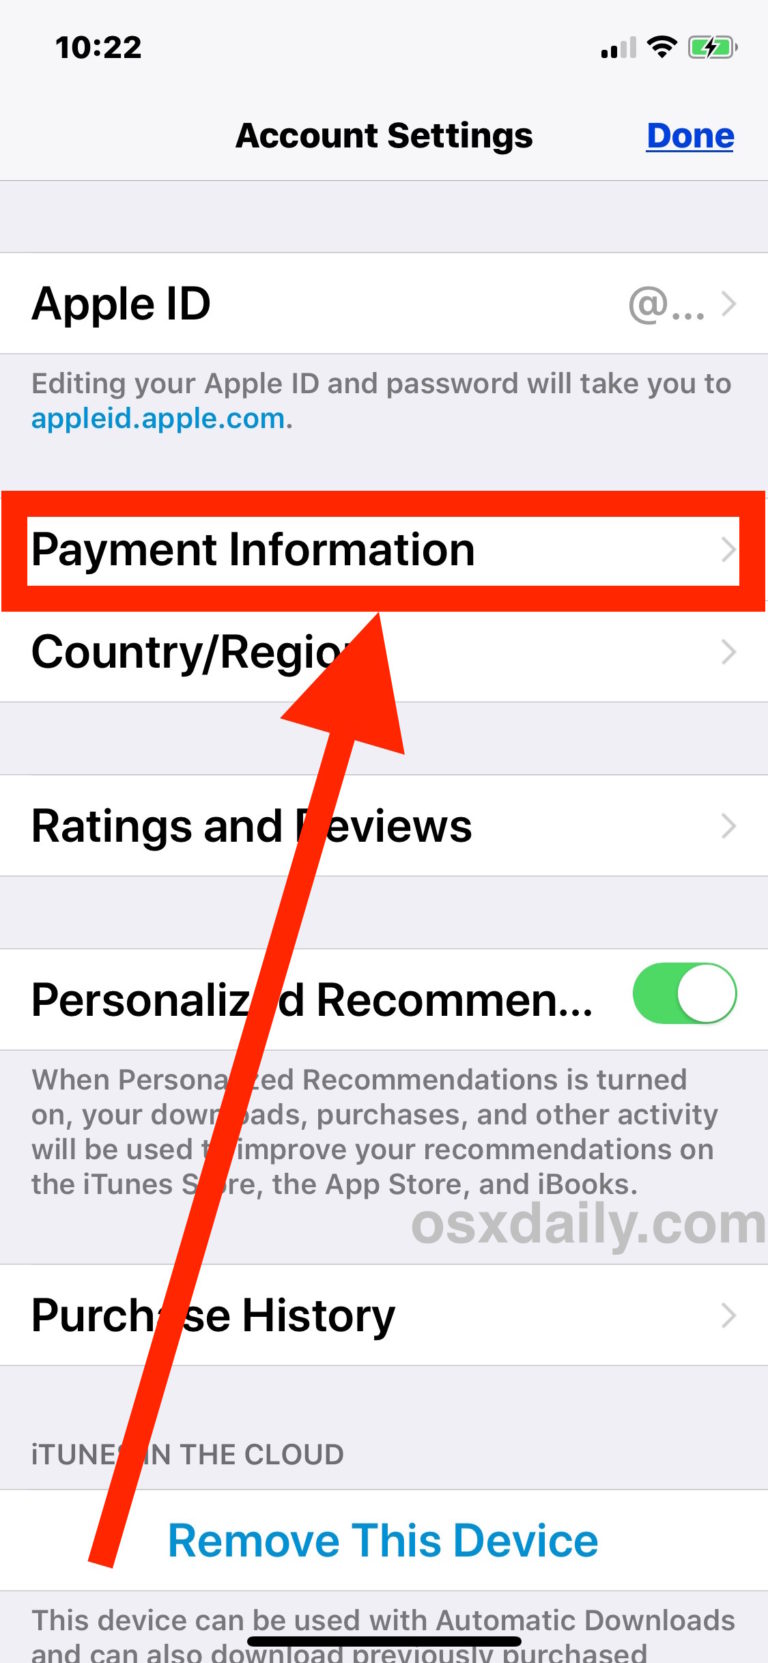 How to Fix “Verification Required” for Apps Downloads on iPhone and iPad